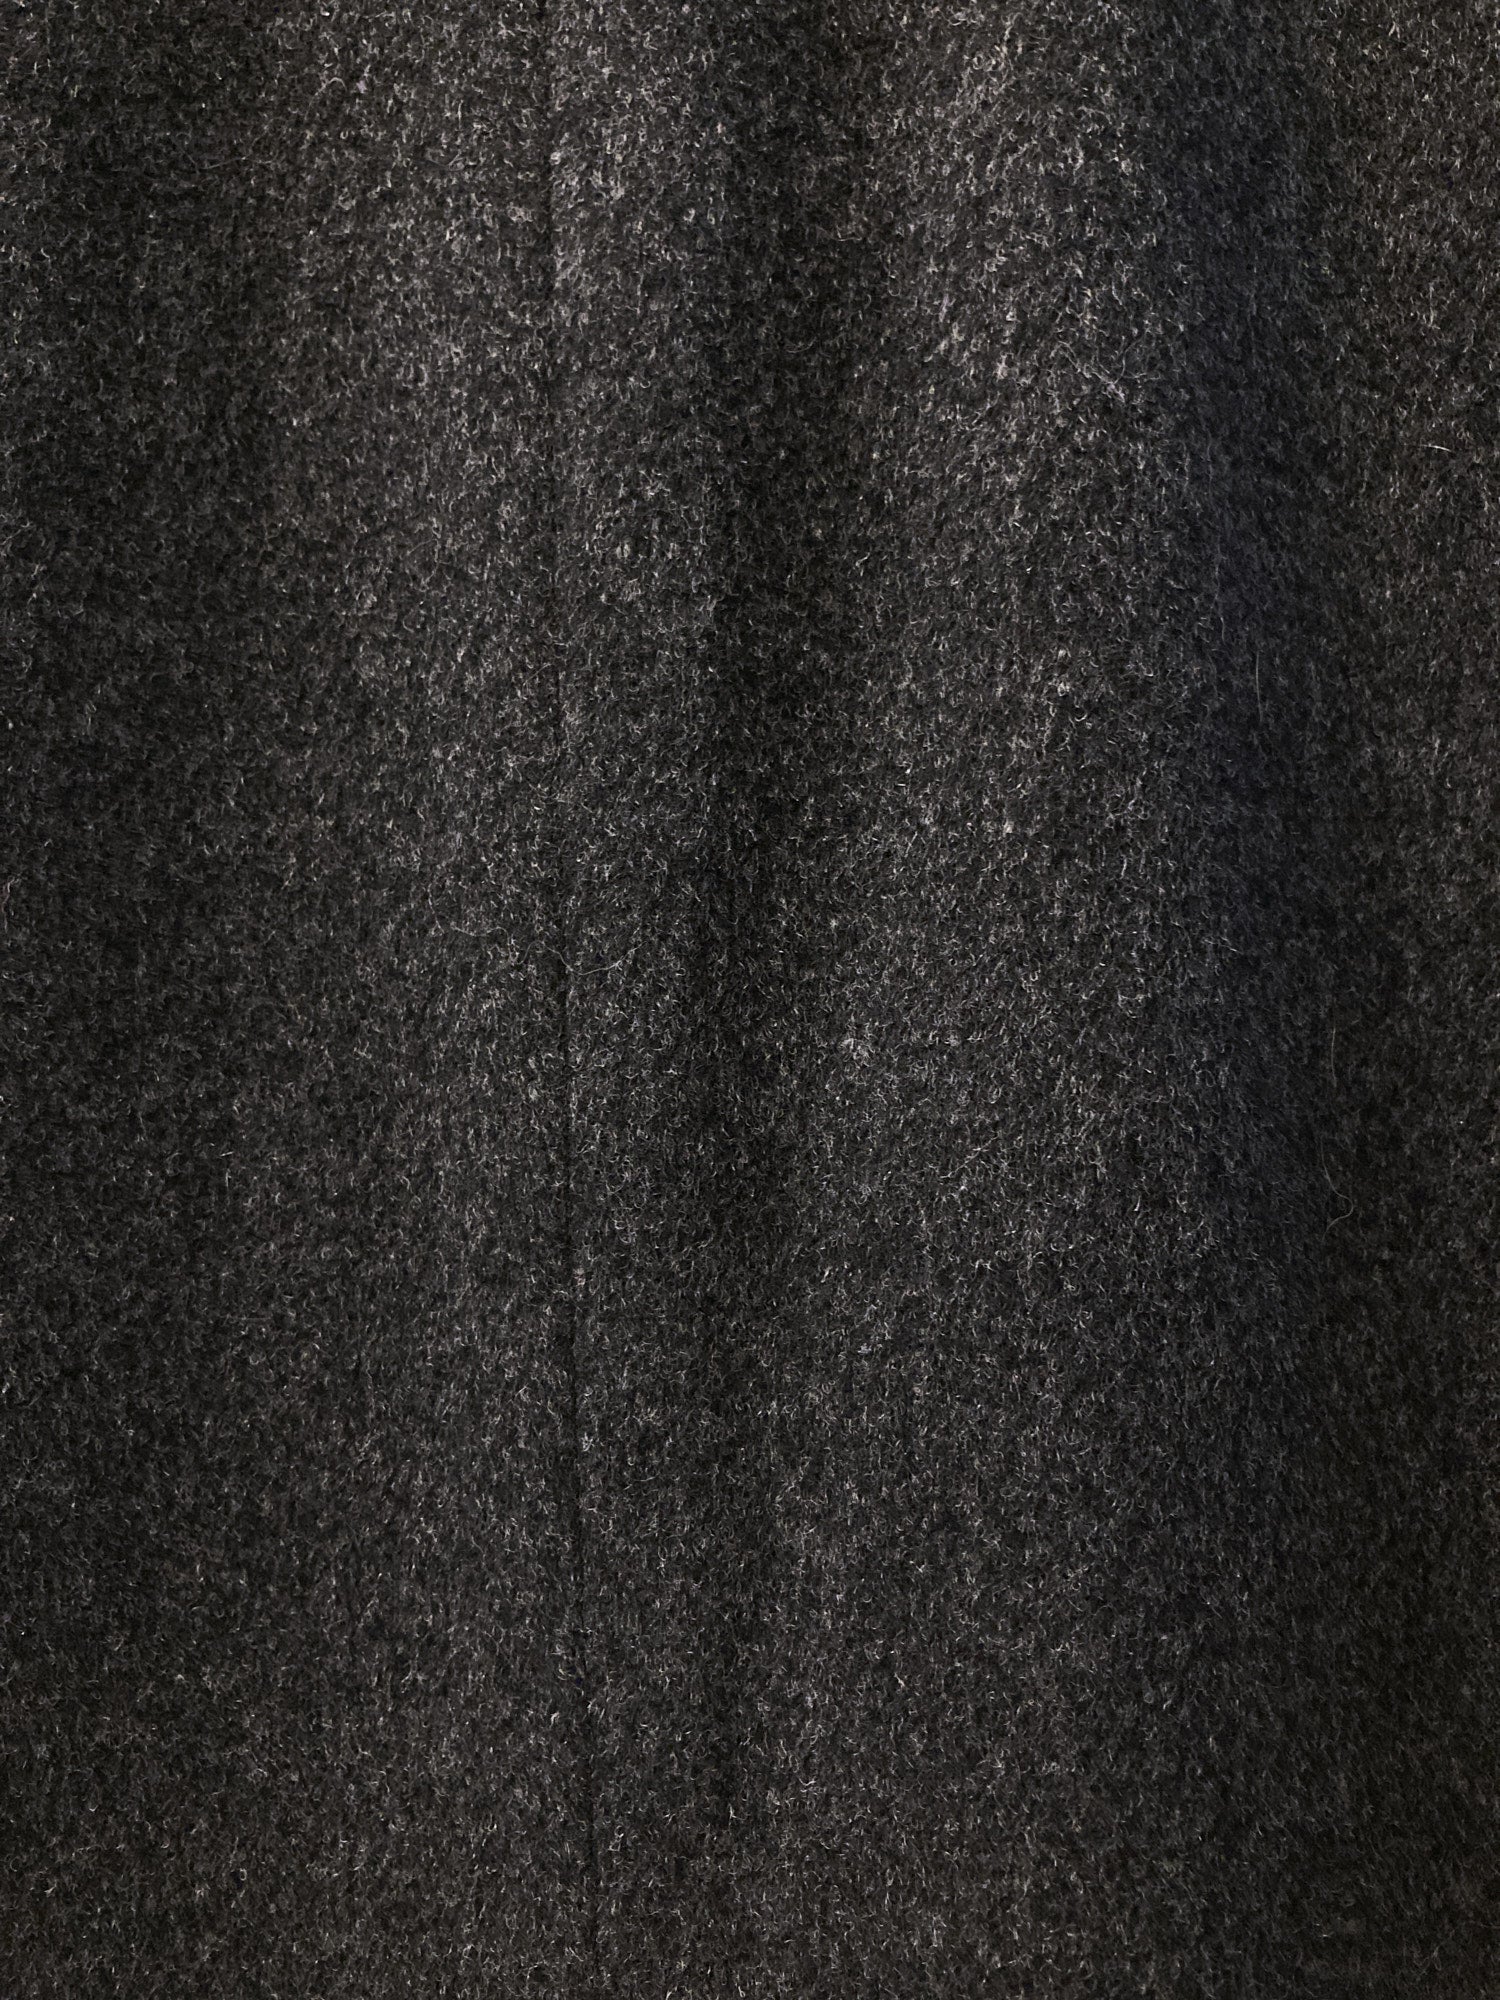 Portfolio by Jean Colonna grey melton wool overcoat with leopard print lining